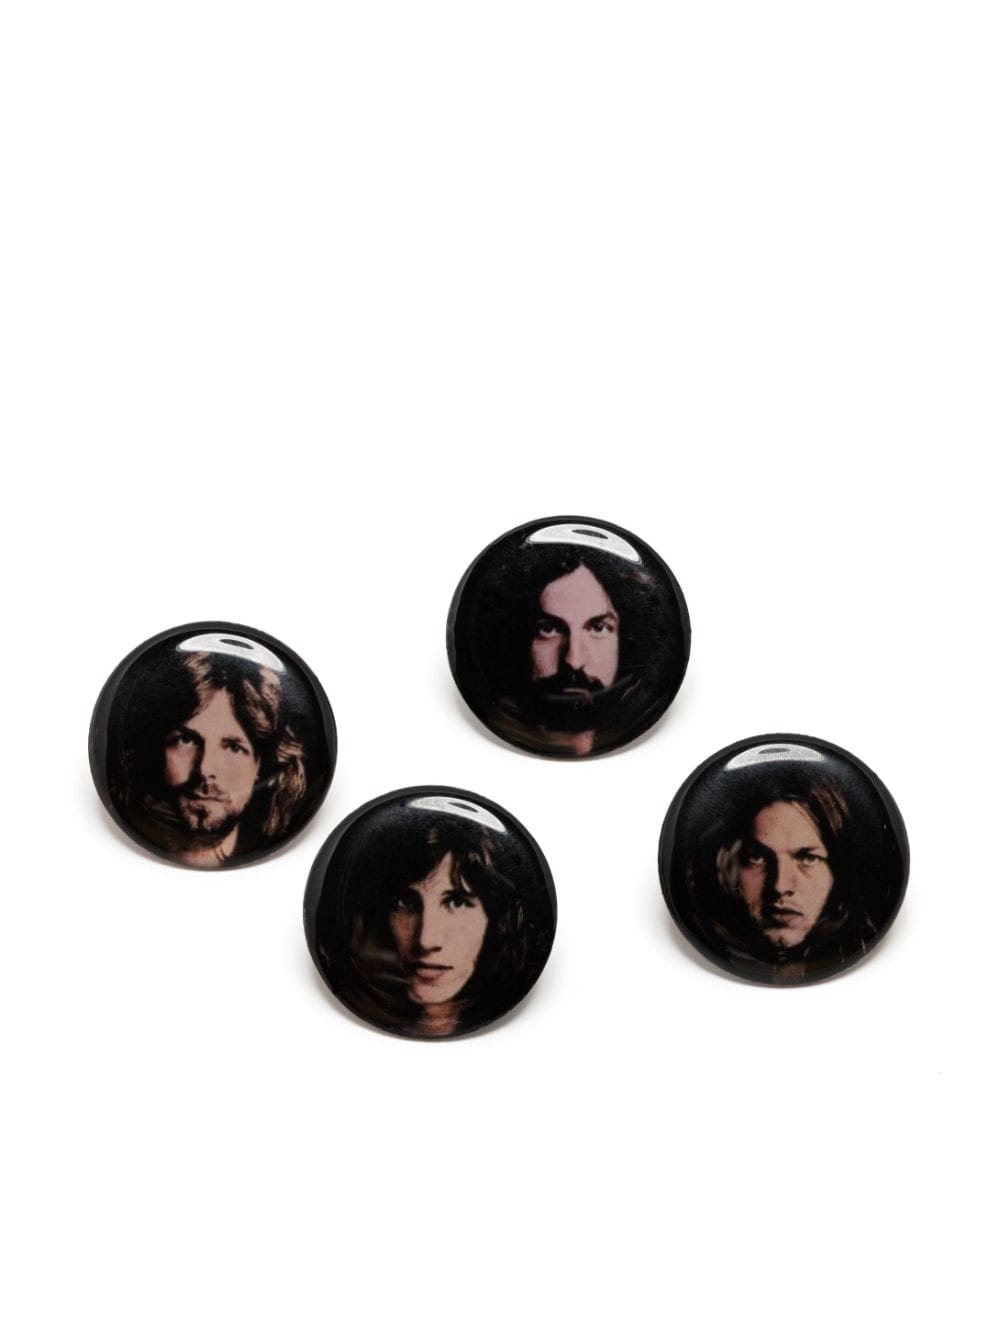 Undercover set-of-four Pink Floyd pins